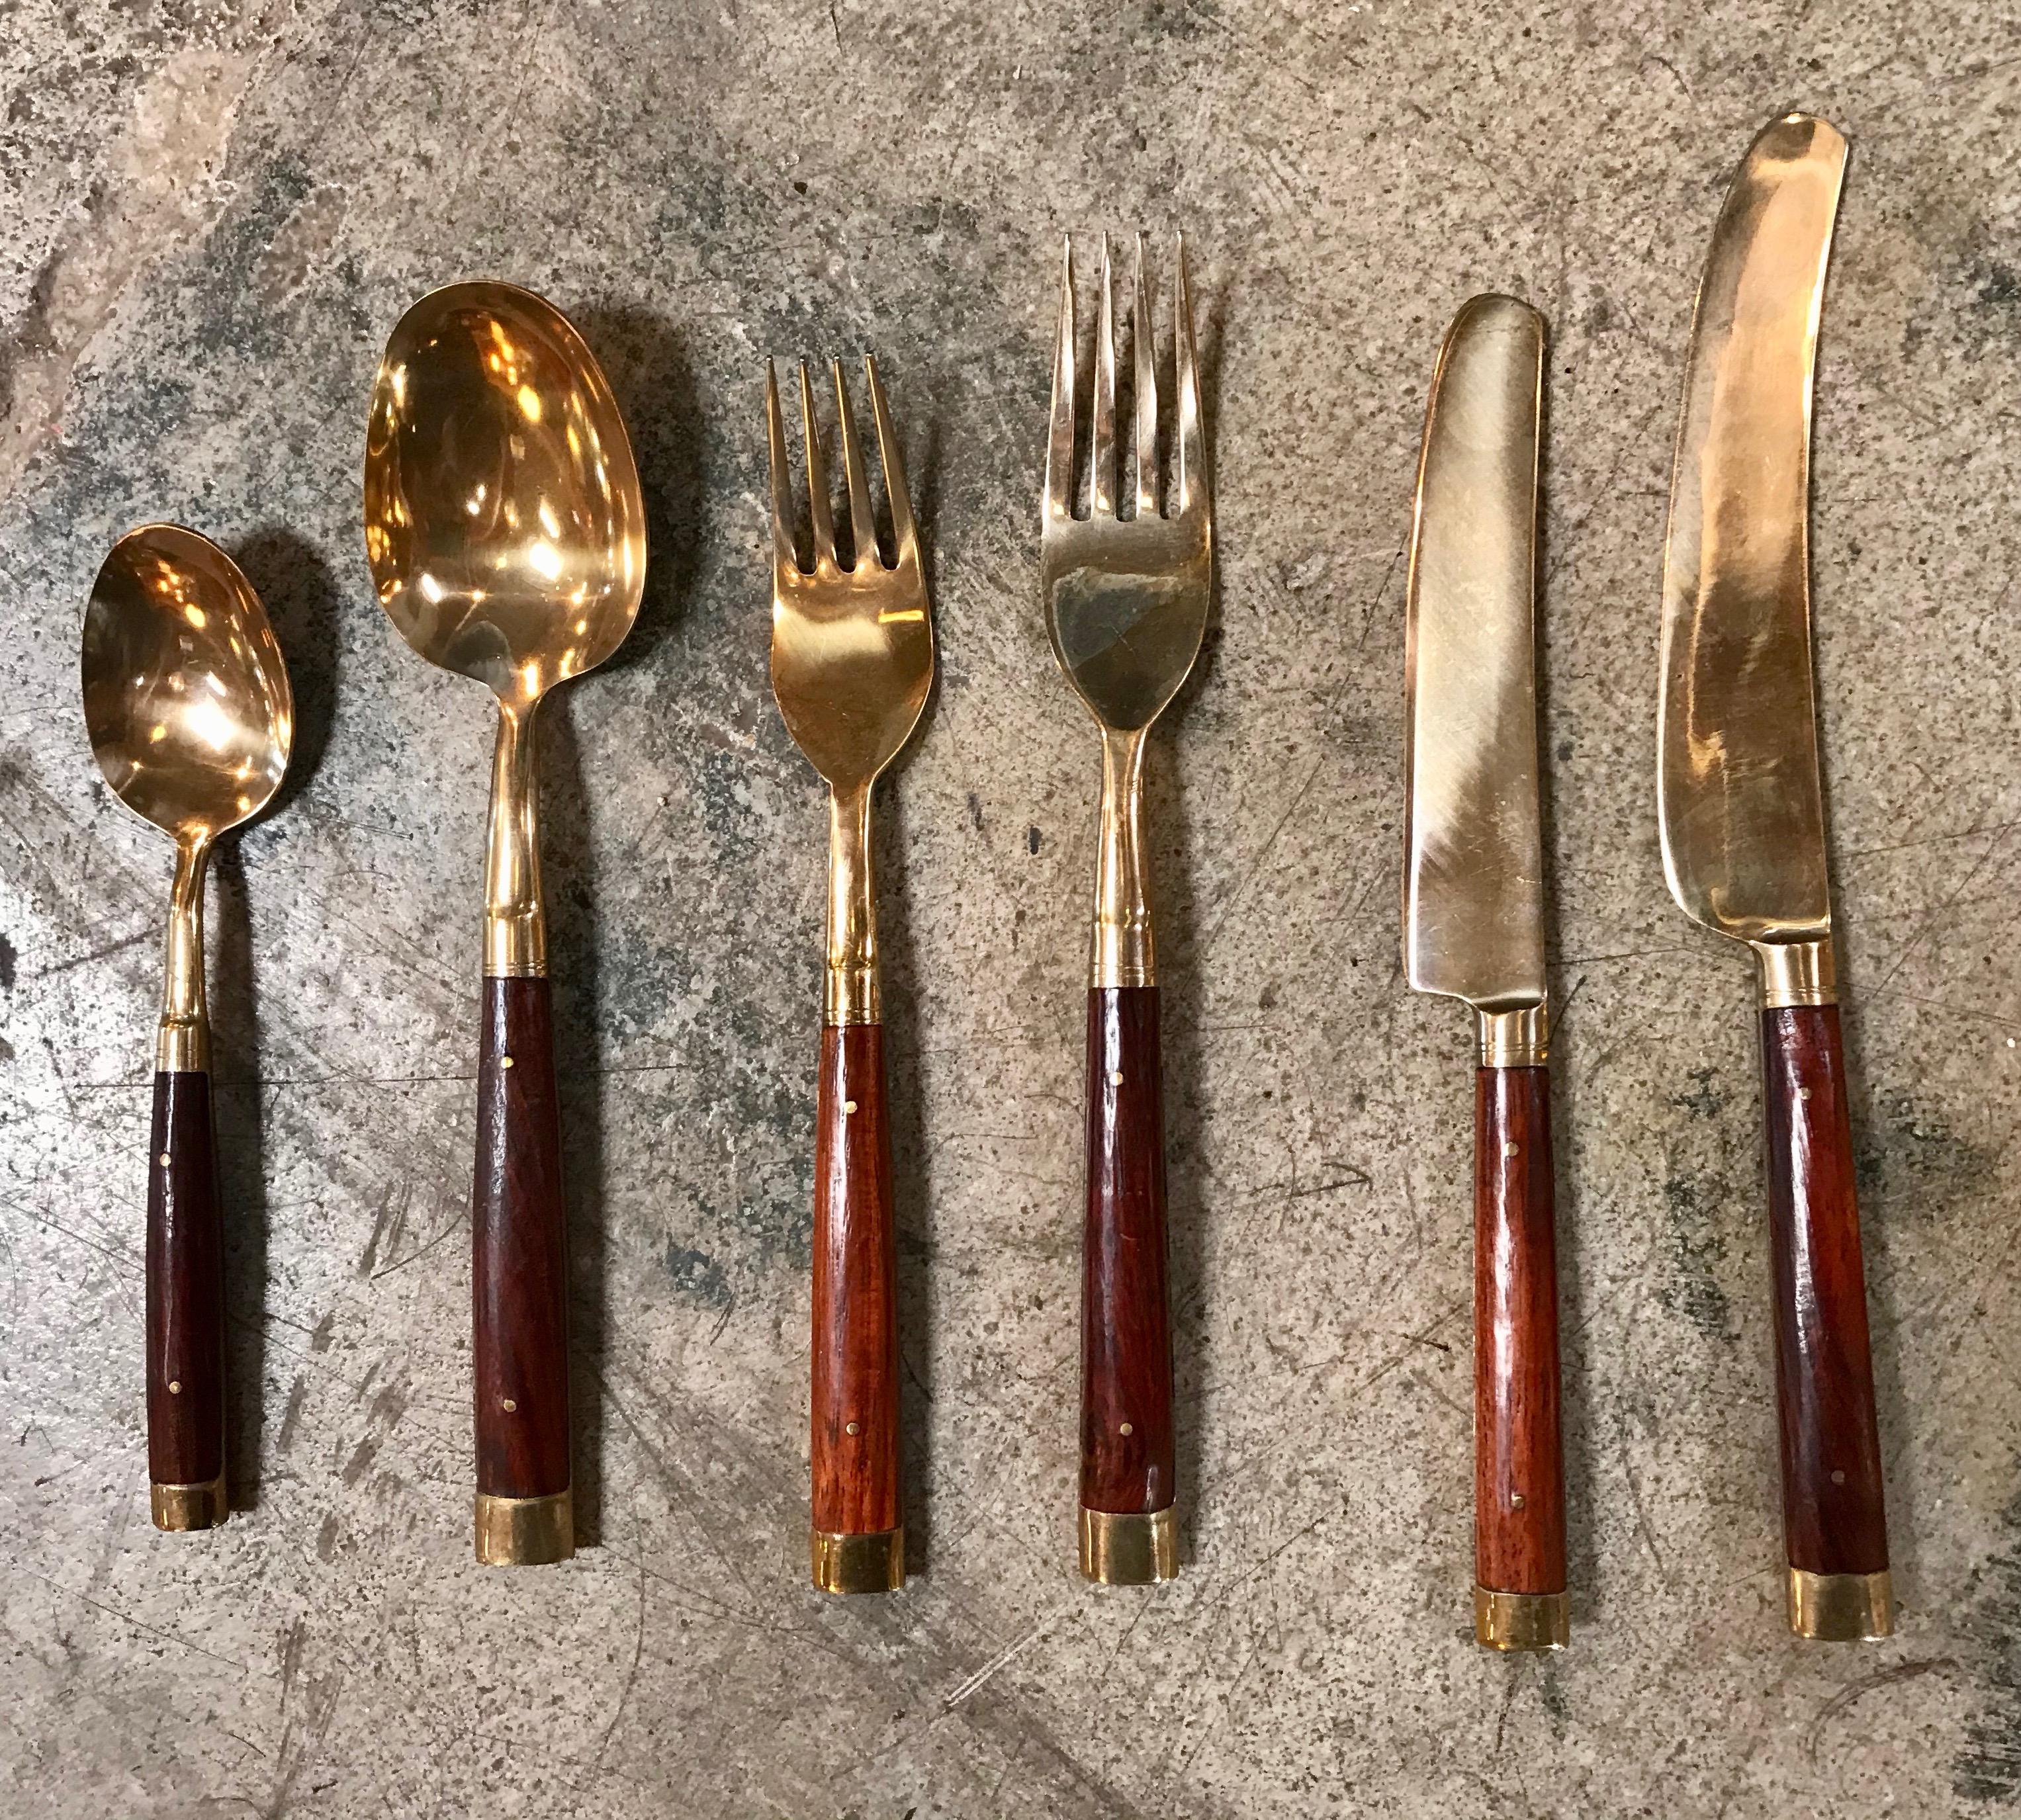 Rare and complete tableware set of 36 Pz for six persons in brass and wood, Italy, 1950s
The set includes an eight pieces; 2 serving forks, 2 serving spoons, cheese knife and carving knife. 
The measurements are for the longest piece.